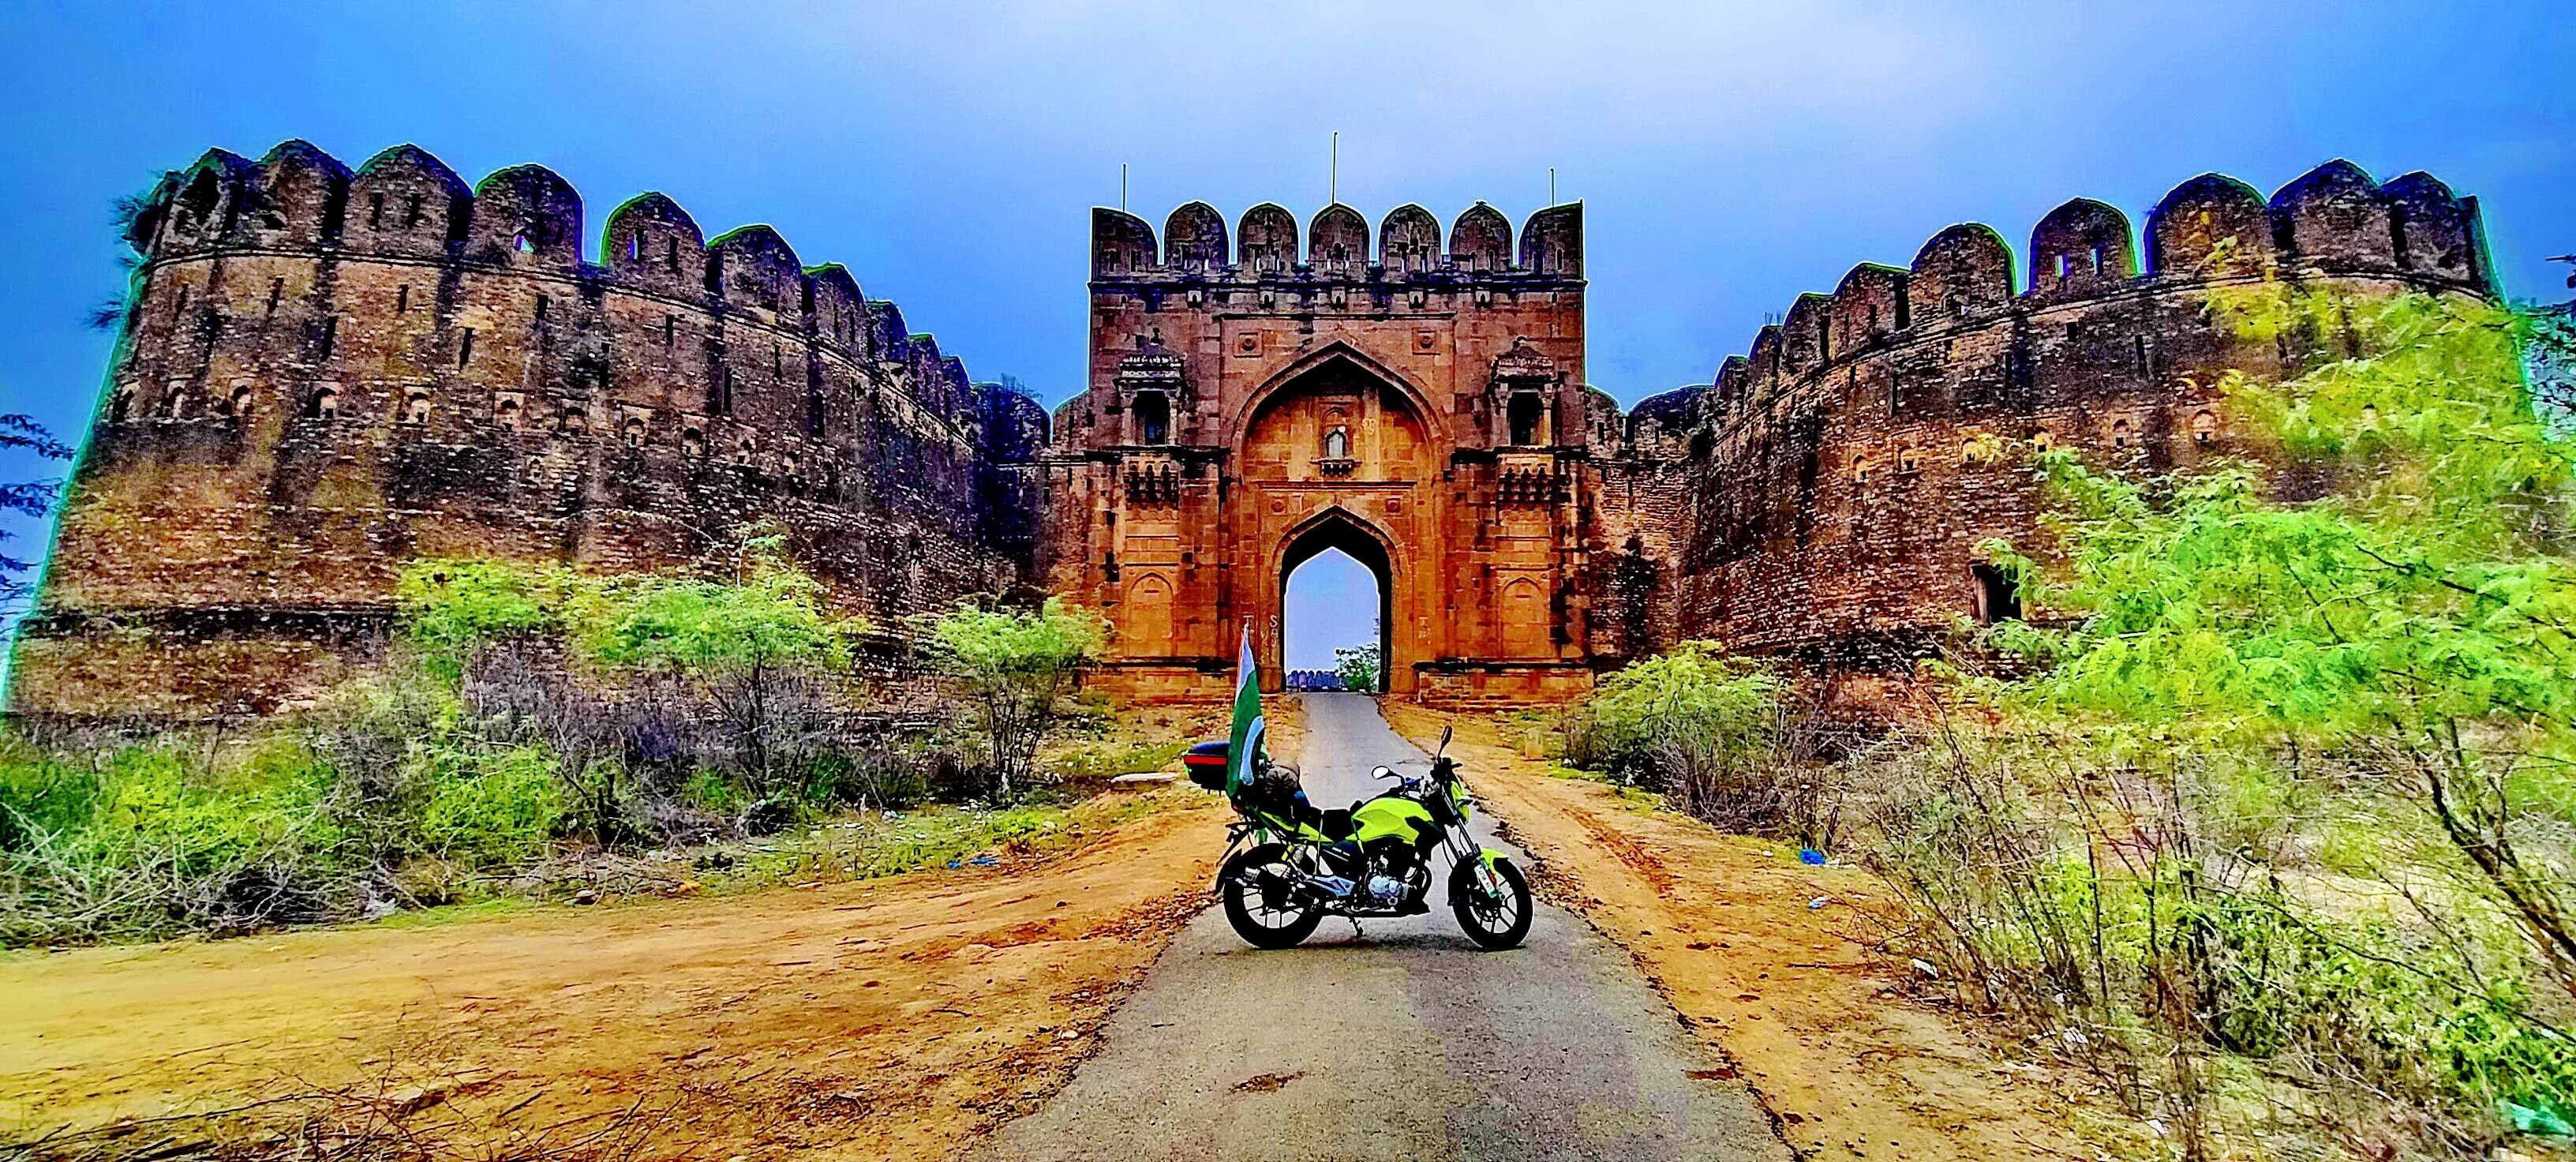 Rohtas Fort in Pakistan, South Asia | Castles - Rated 3.8